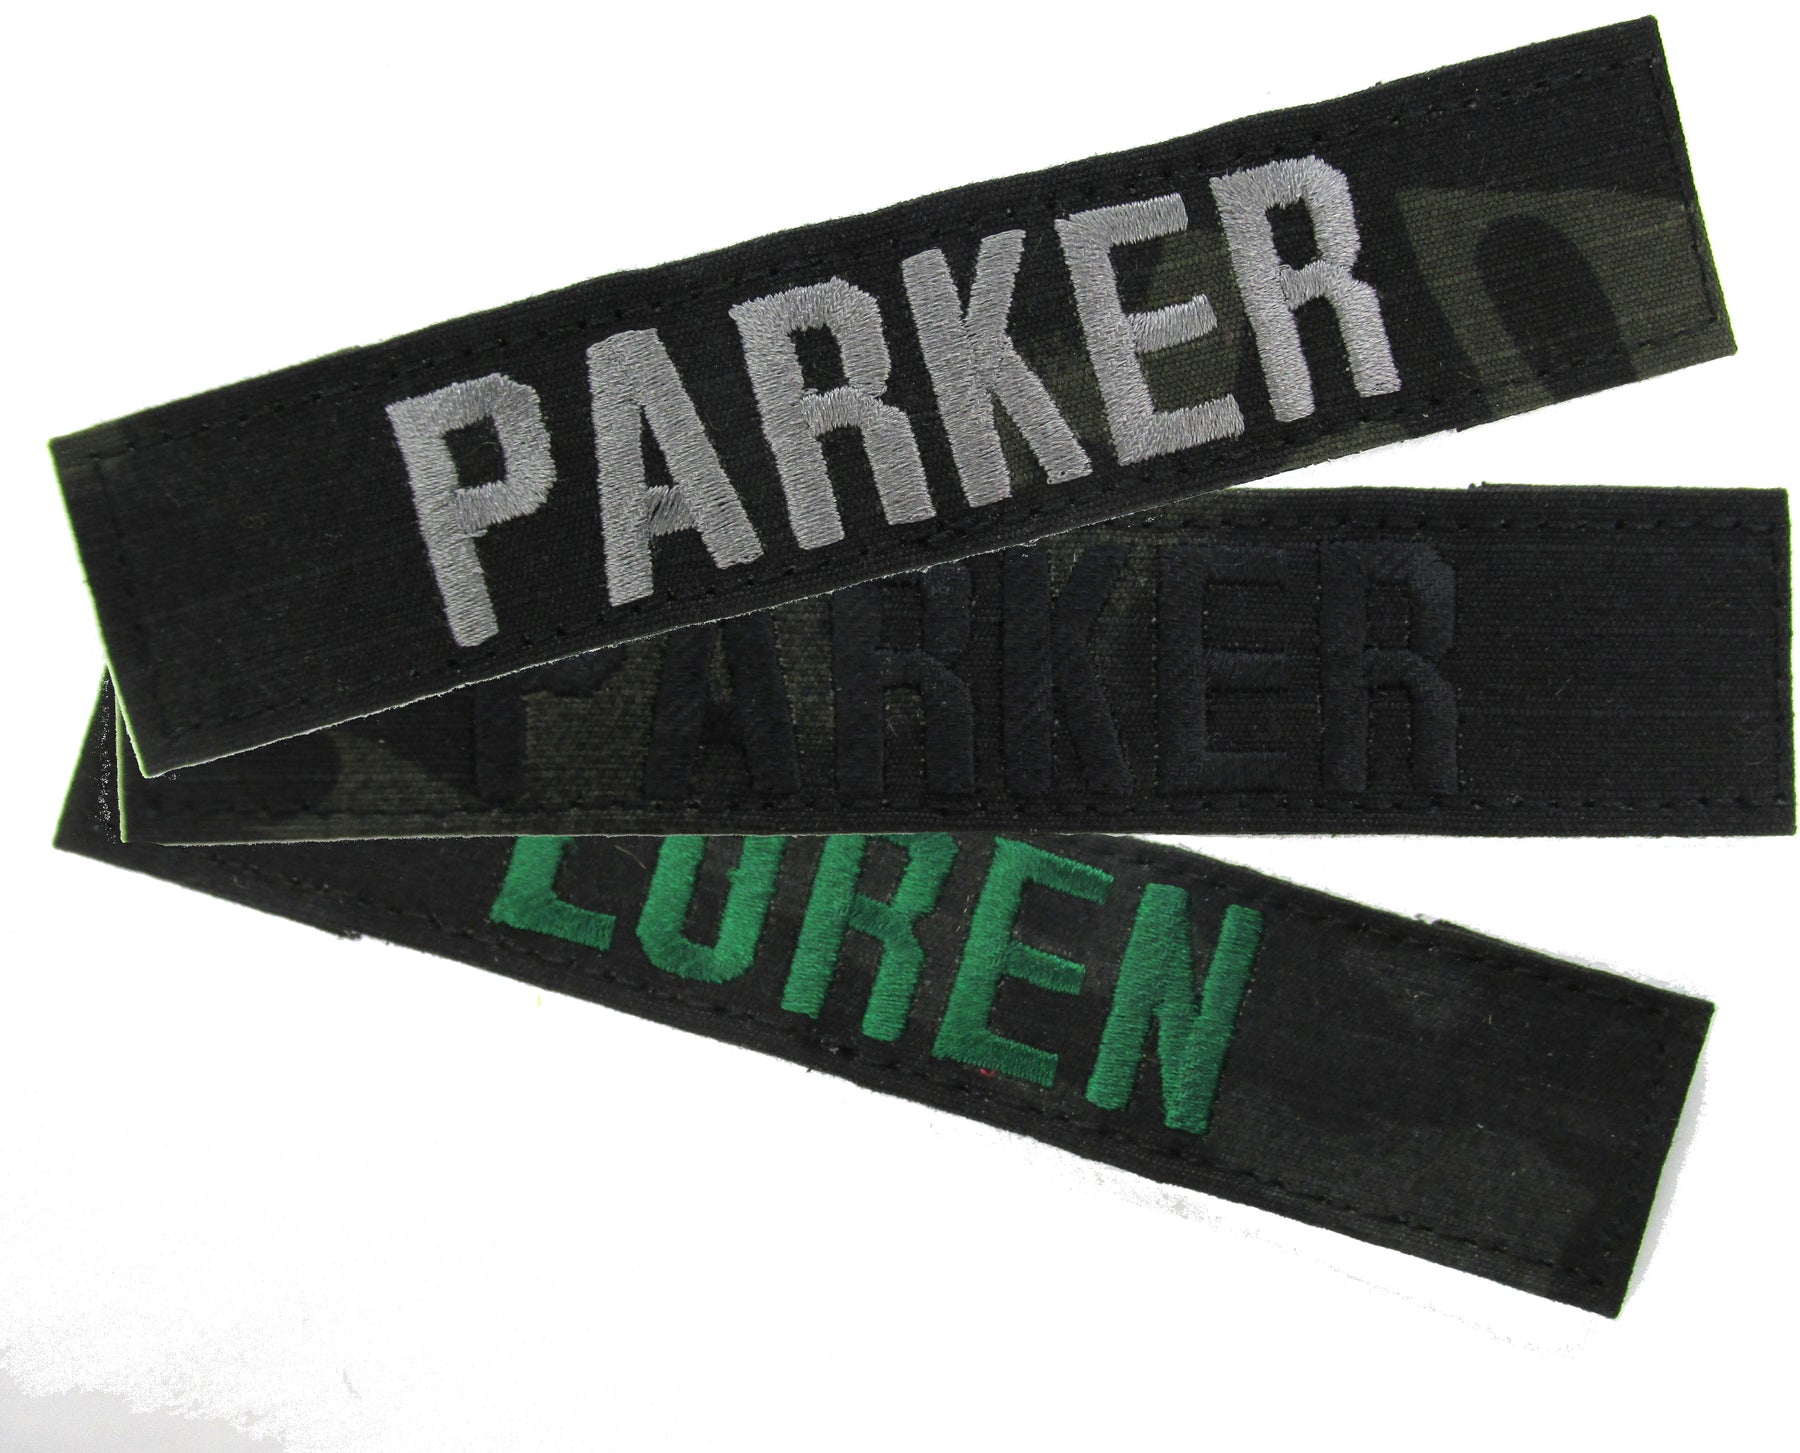  4 Inches (W) Personalized Custom Name Tape with Hook Fastener  Tape Backing / Tactical Patch